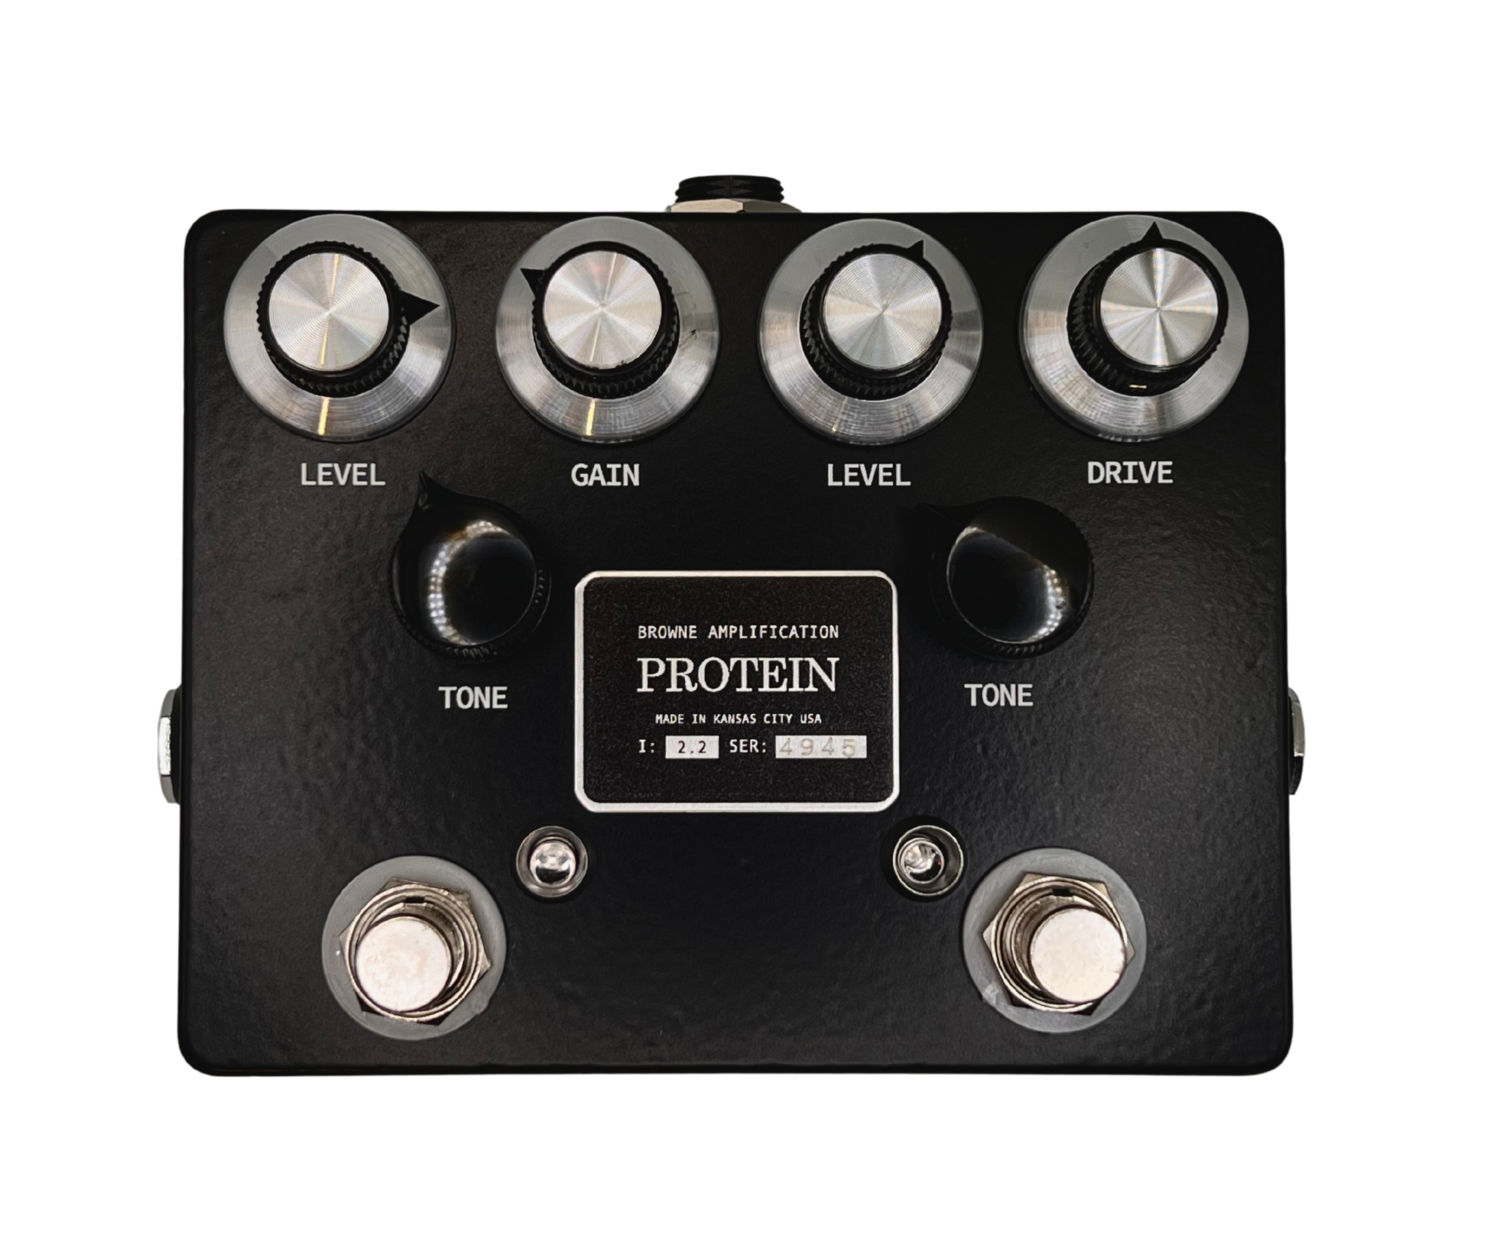 browne amplification PROTEIN エフェクター 楽器/器材 おもちゃ・ホビー・グッズ 【5％OFF】